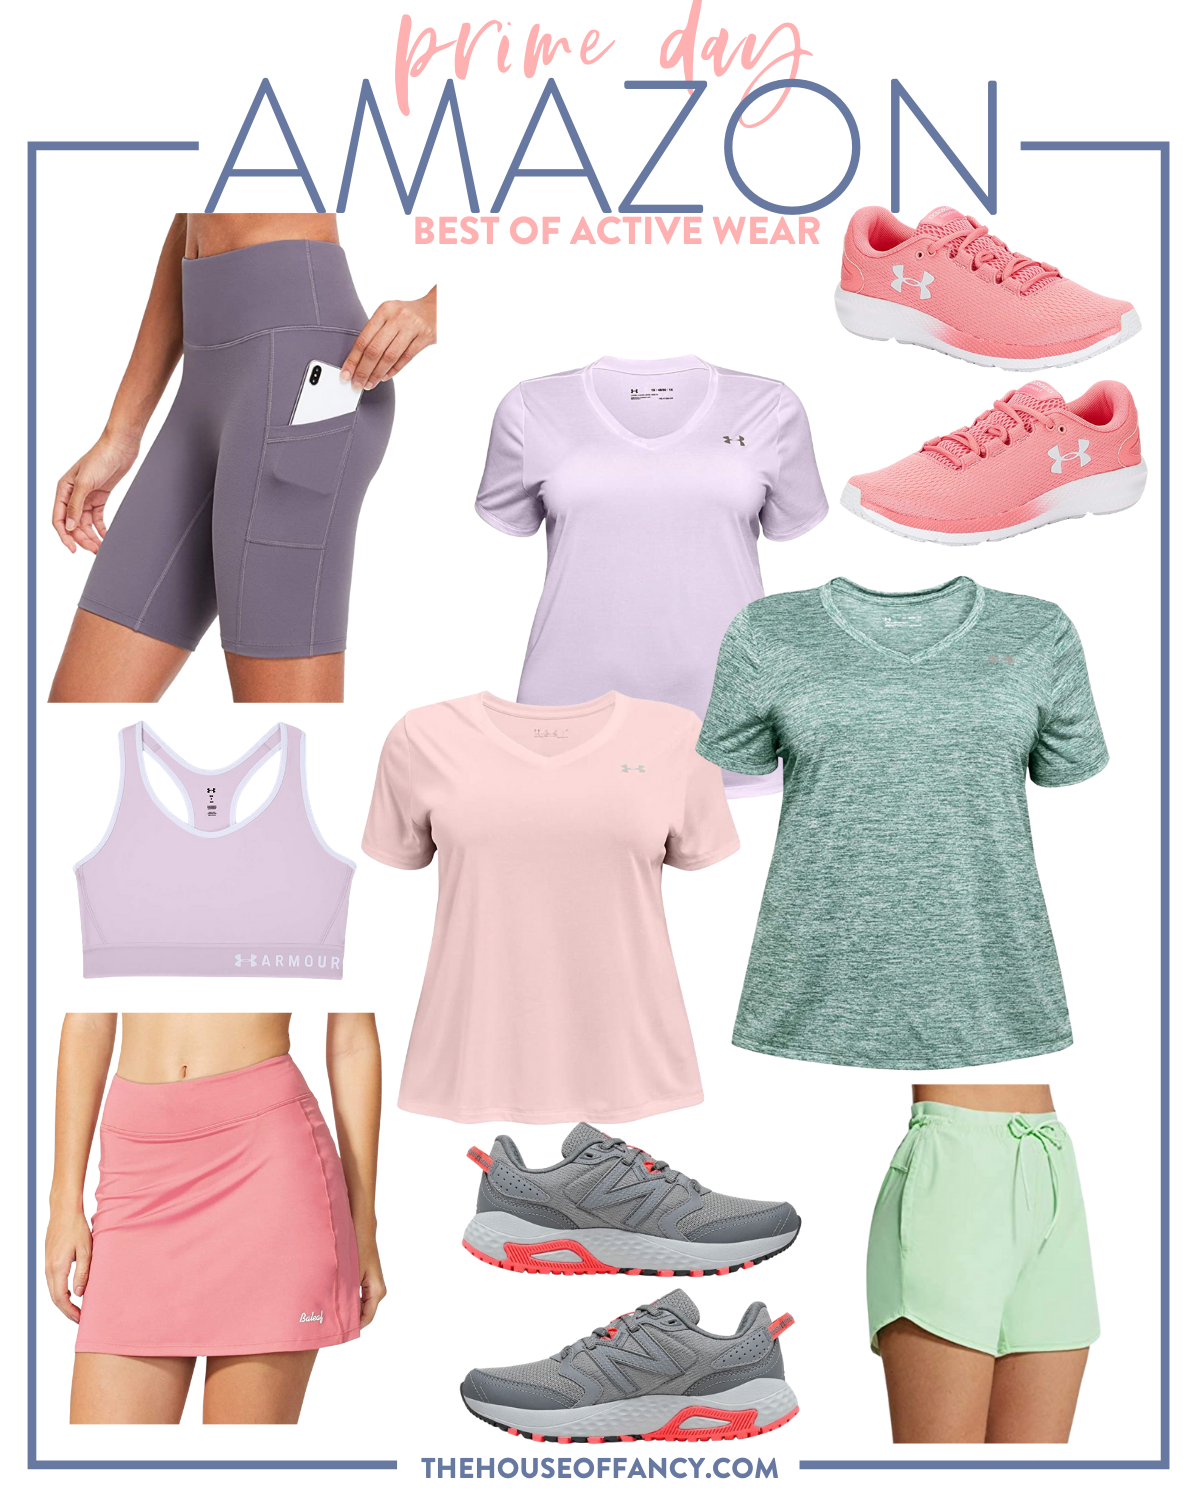 Amazon Prime Day by popular Houston life and style blog, The House of Fancy: collage image of a light purple Under Armor sports bra, Under Armor dry active shirts, dry active shorts, Nike sneakers, pink athletic skirt, Under Armor sneakers, and purple biker shorts with pockets. 